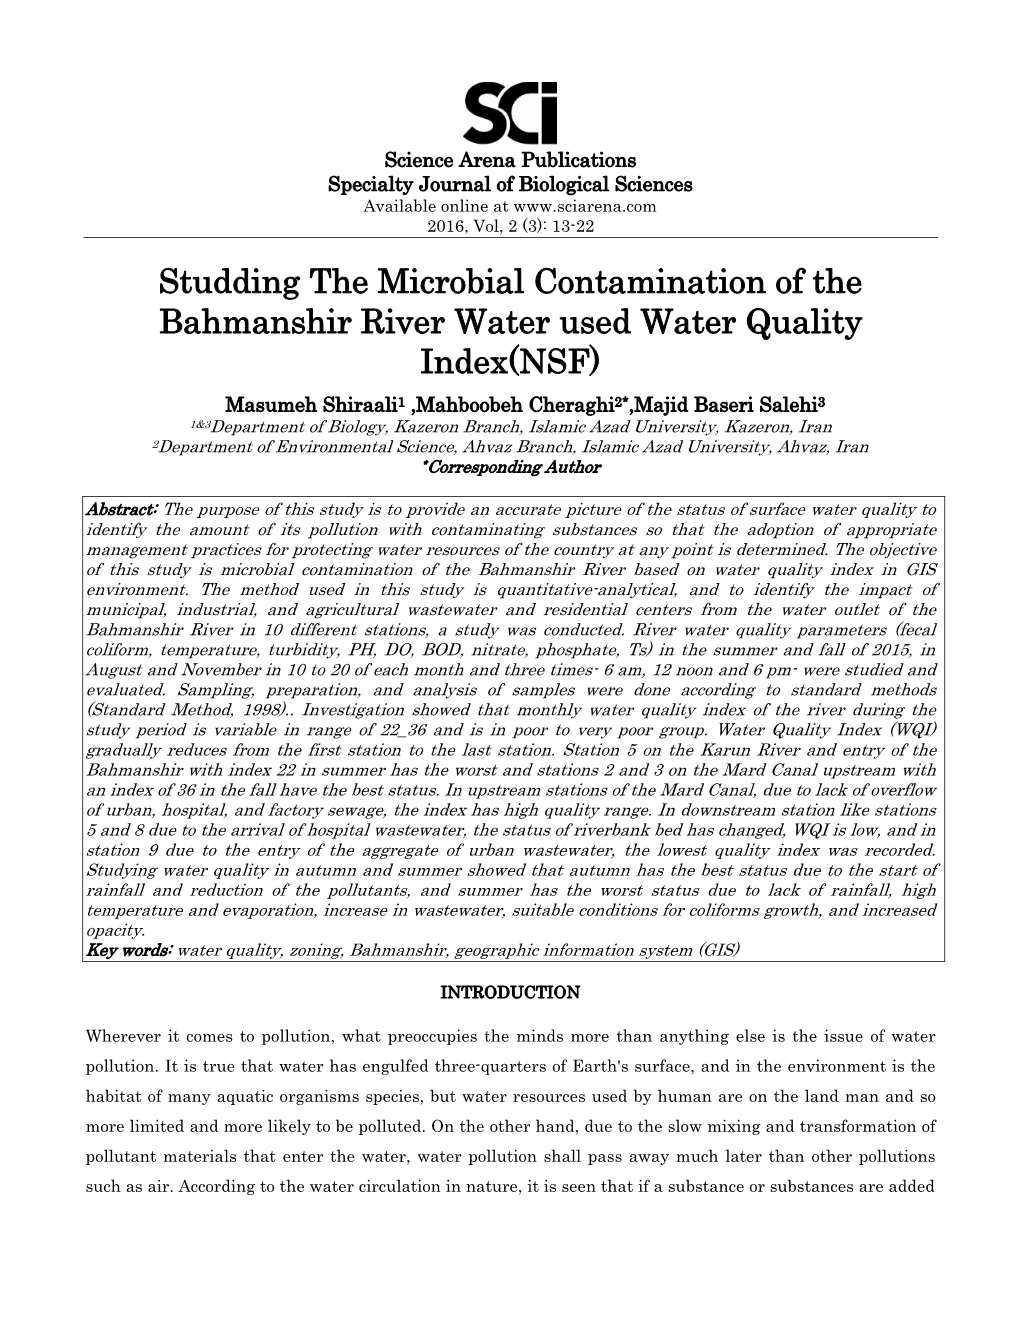 Studding the Microbial Contamination of the Bahmanshir River Water Used Water Quality Index(NSF)